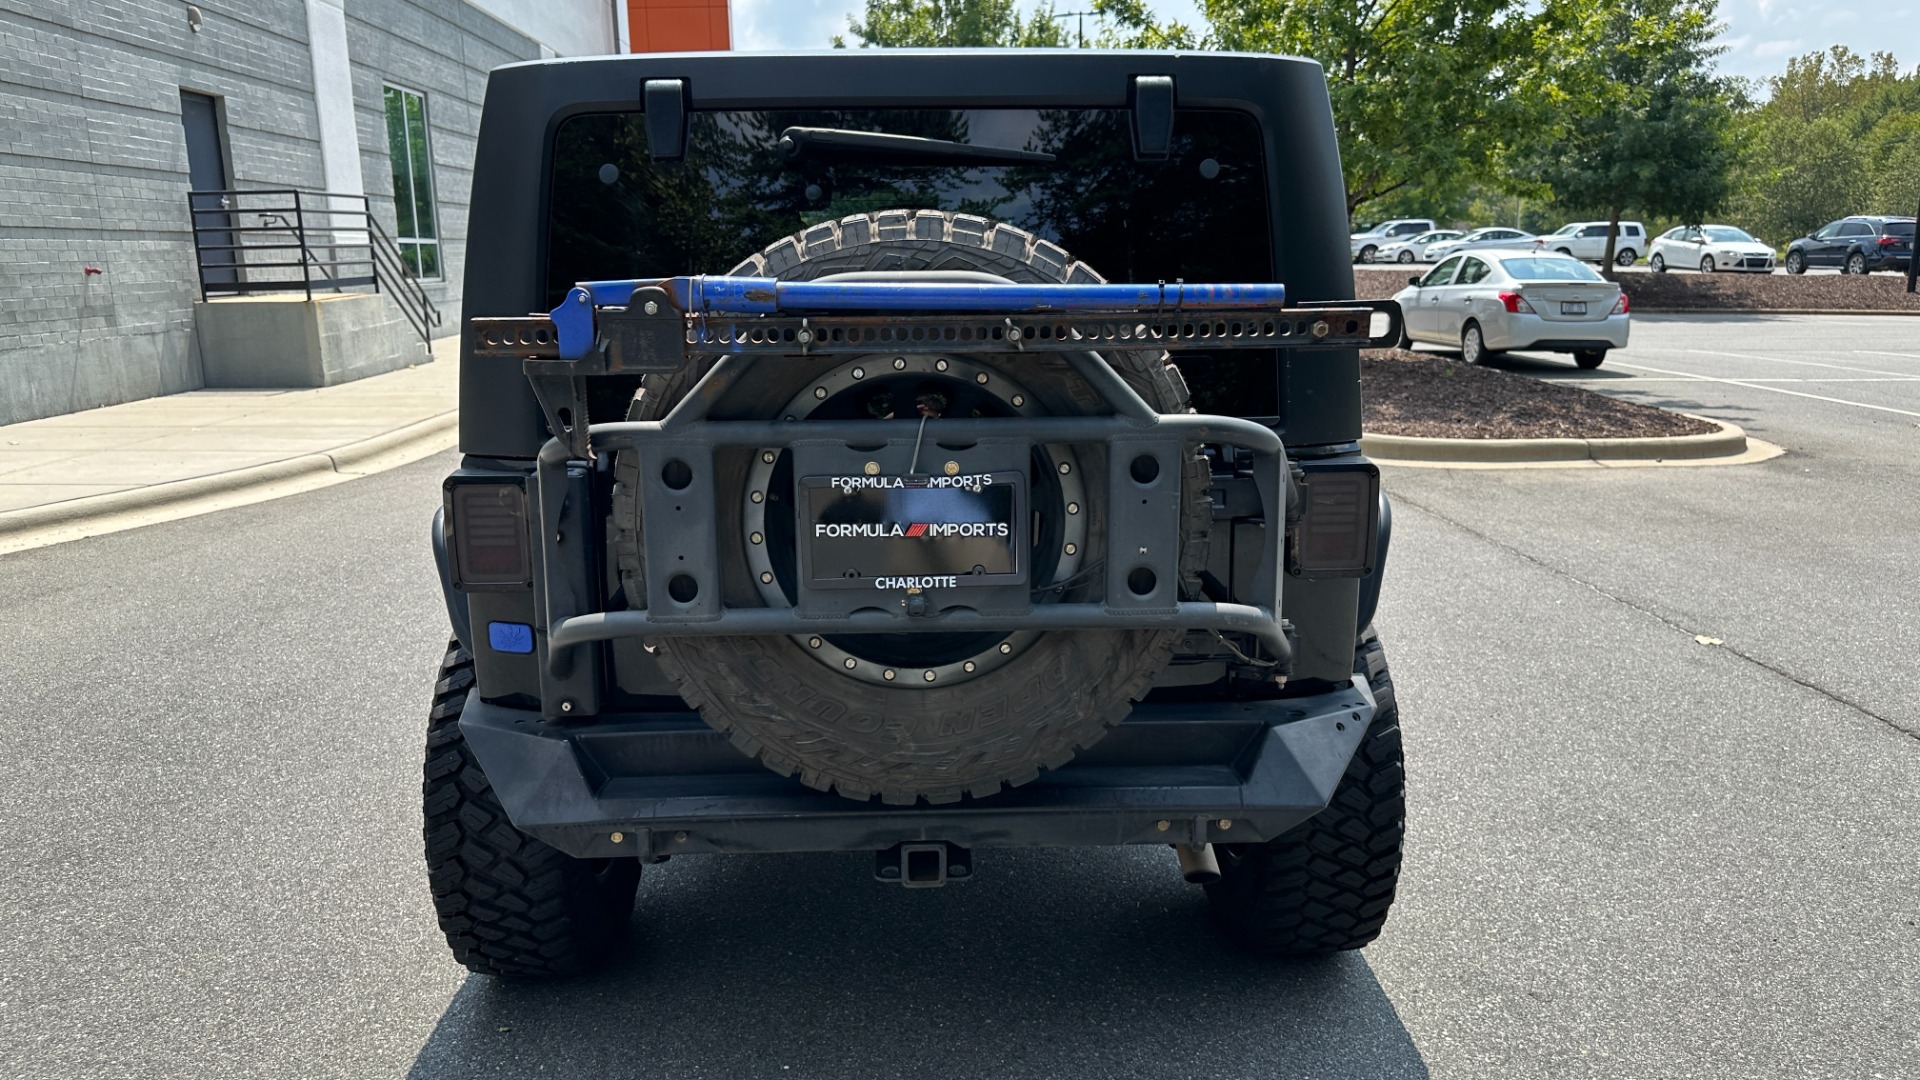 Used 2013 Jeep Wrangler Unlimited Sport / FOX SHOCKS / SOUND SYSTEM / TOUCHSCREEN / SUBWOOFER / TERRAFLEX SUS for sale $24,999 at Formula Imports in Charlotte NC 28227 6